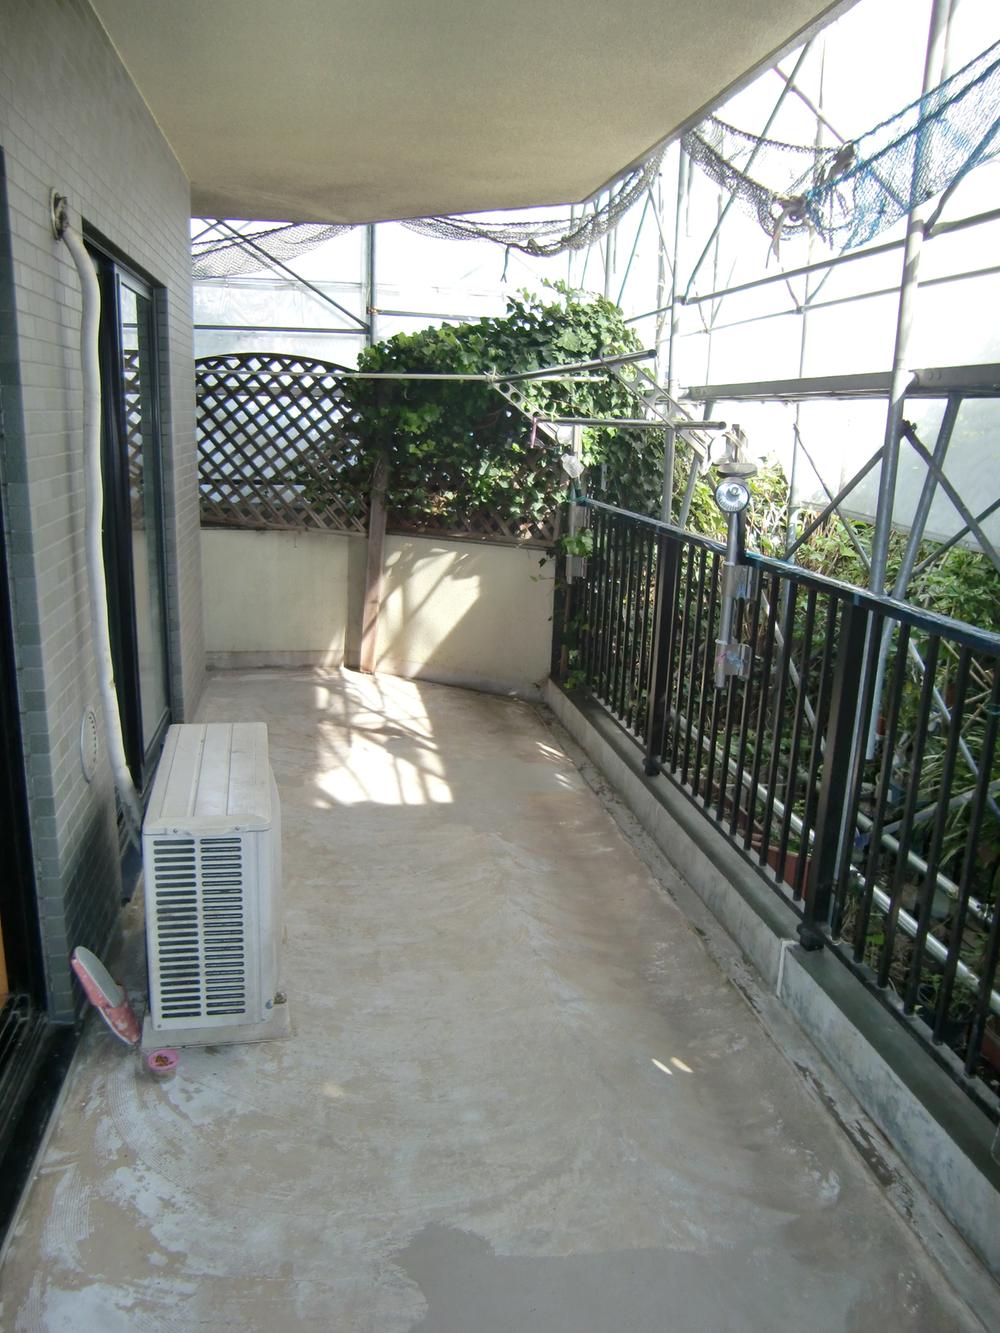 Balcony. It is now repair, Balcony with a space facing the private garden